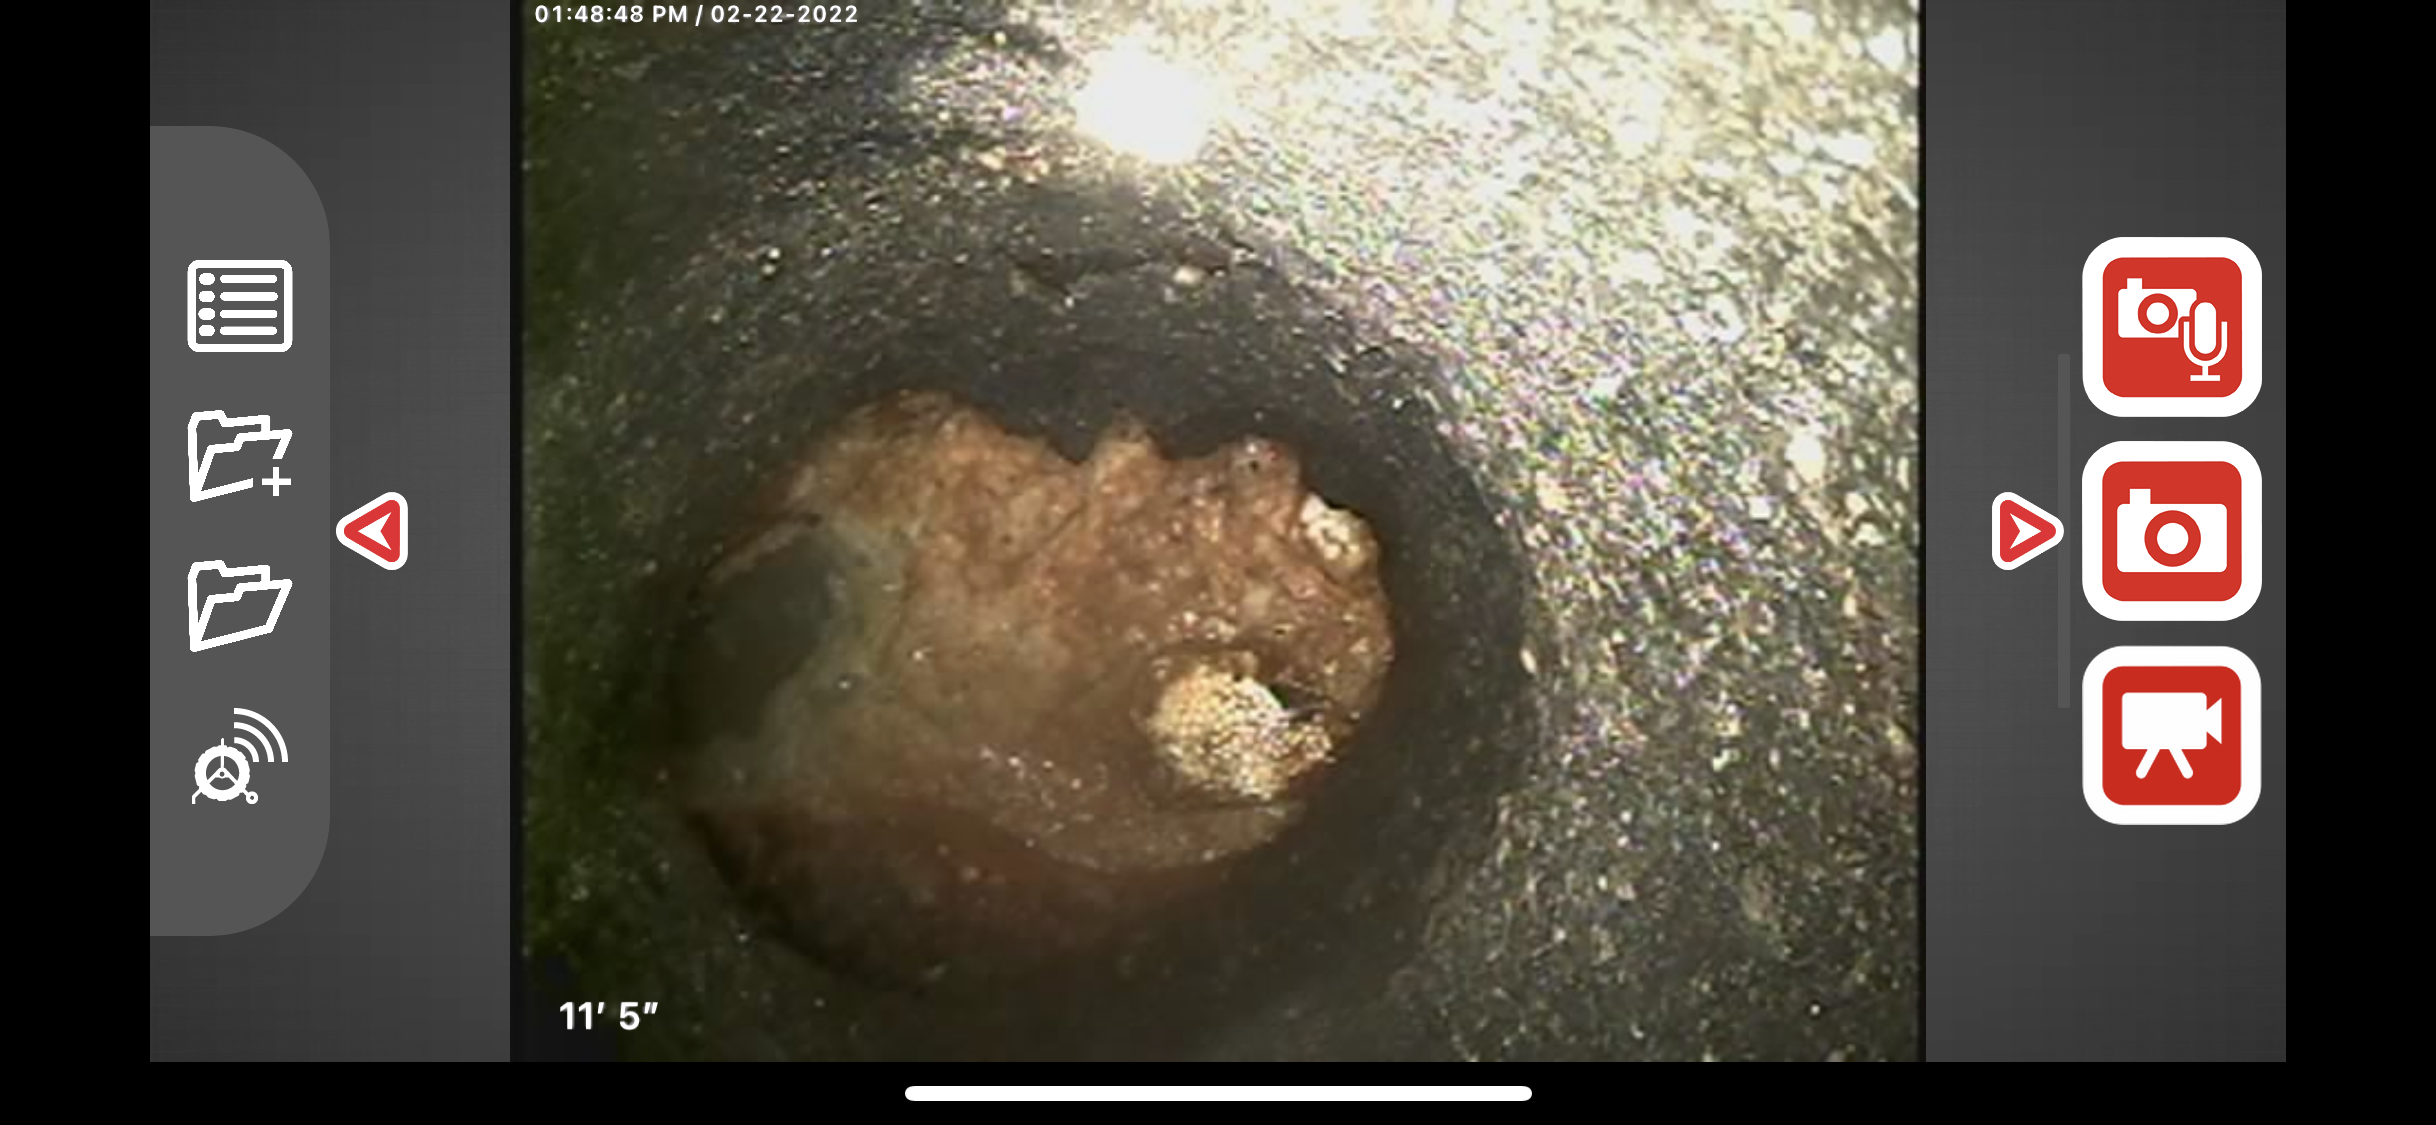 Video Camera Drain Inspection: How Does It Work And Why Is It Important?